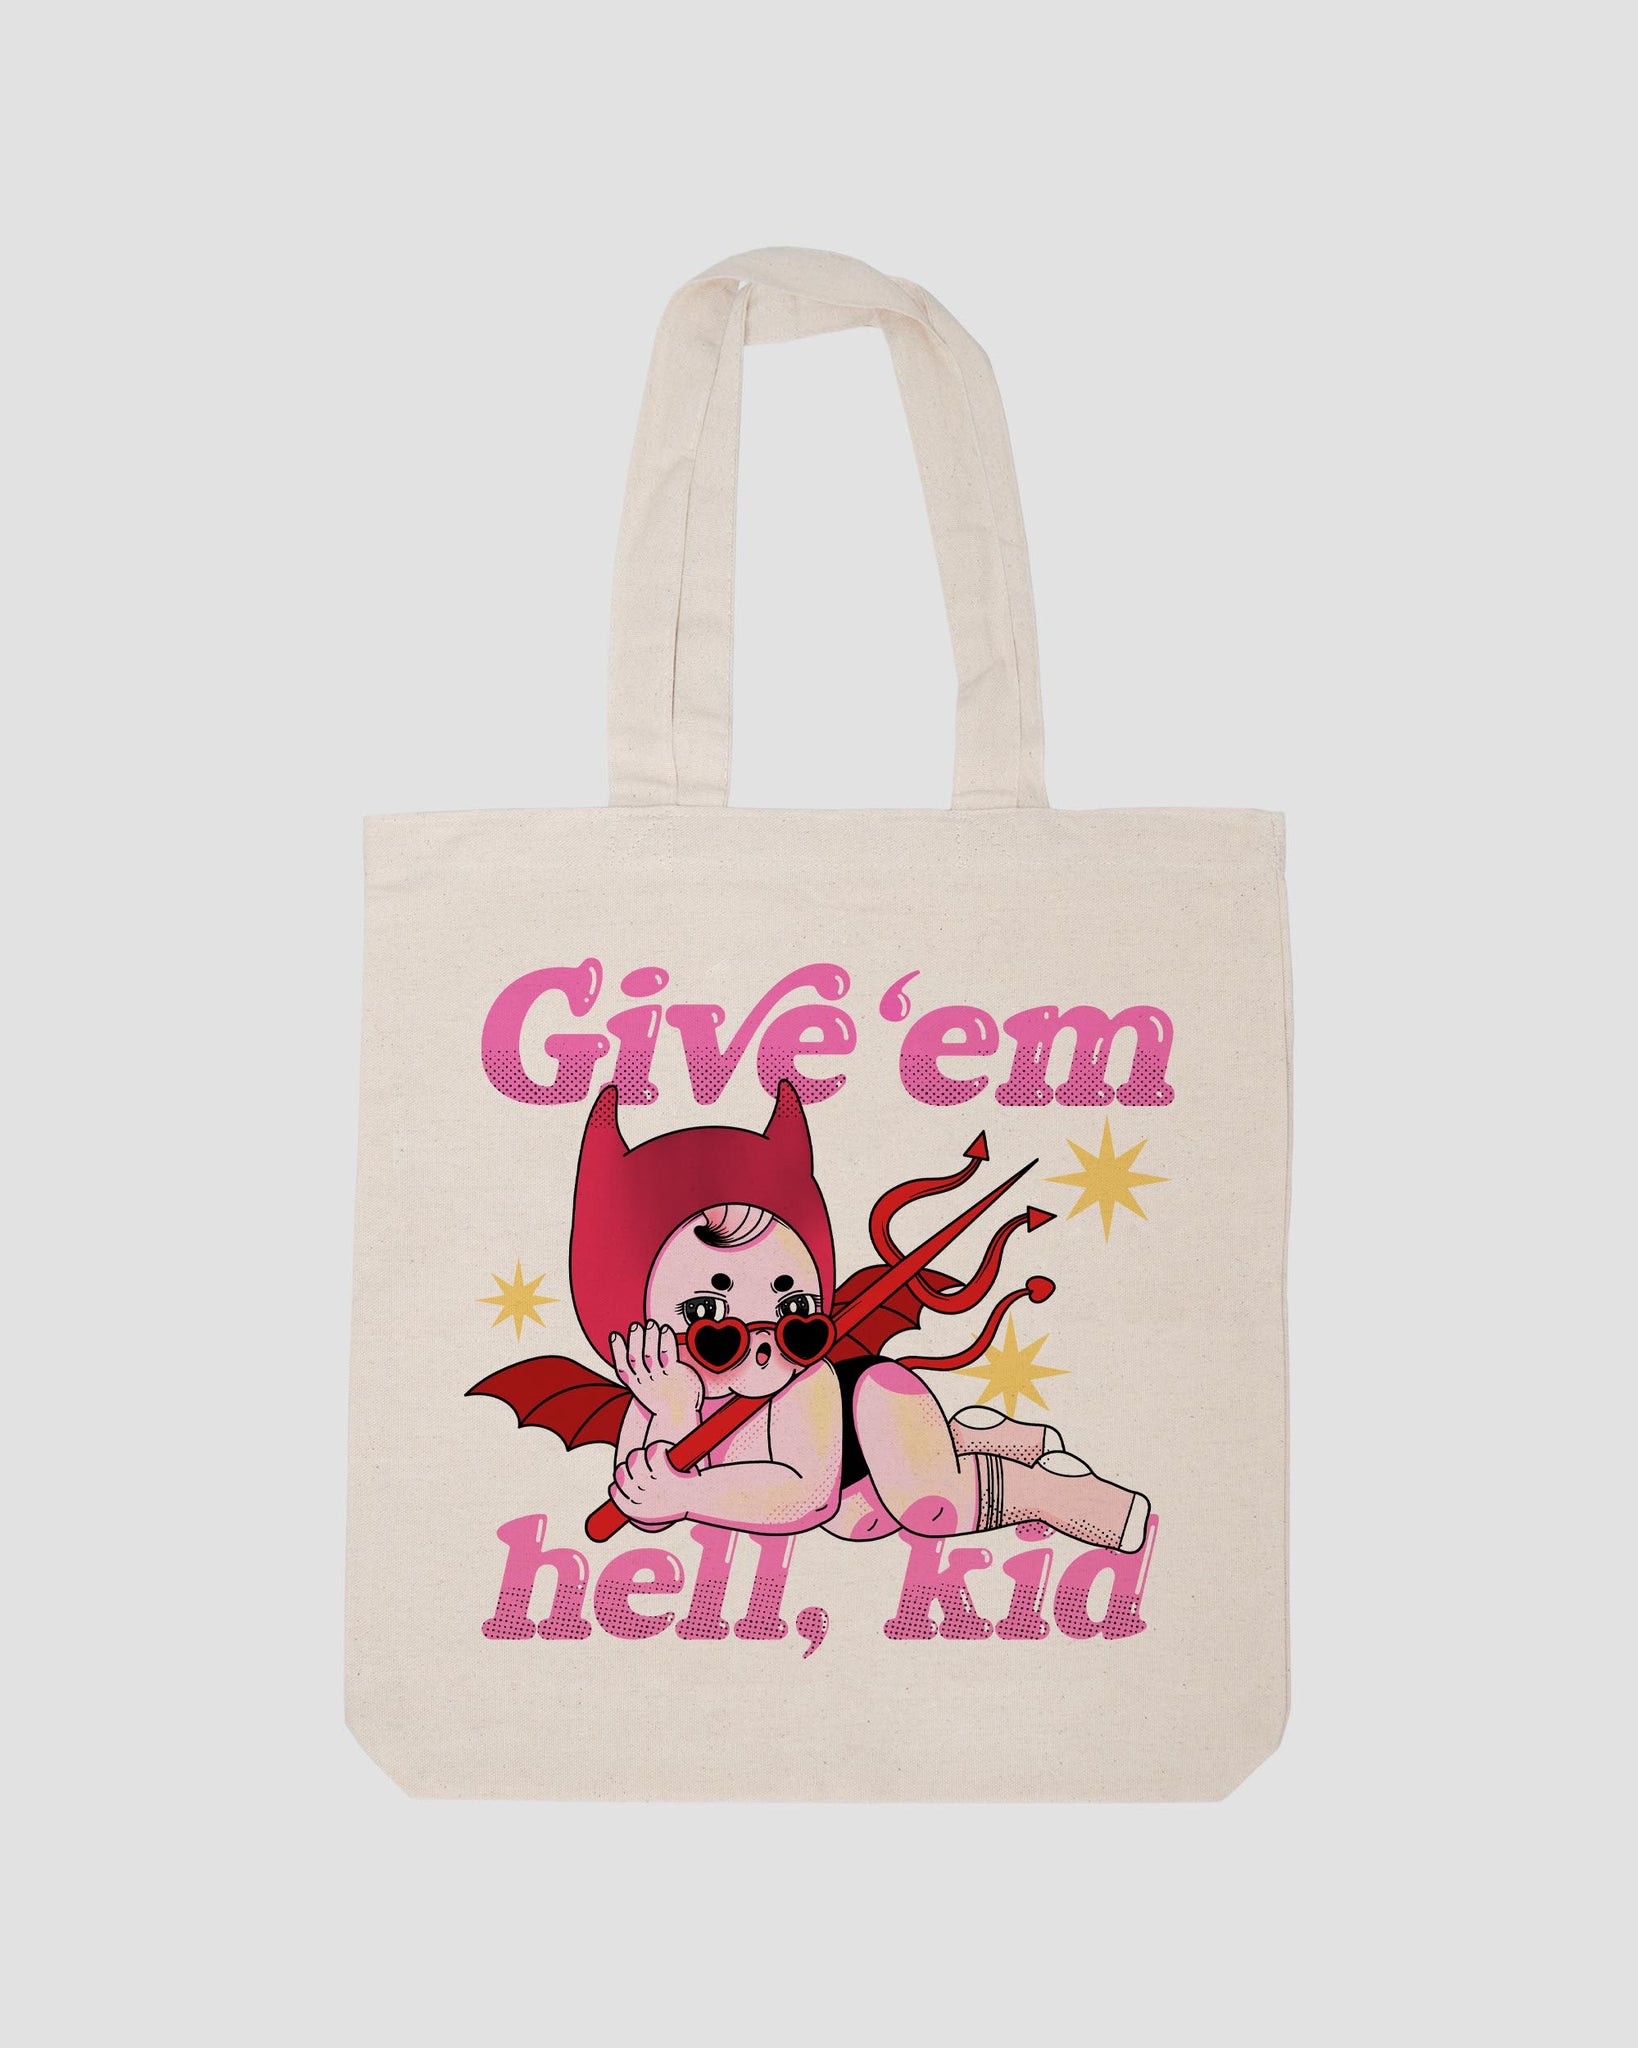 GIVE 'EM HELL, KID TOTE